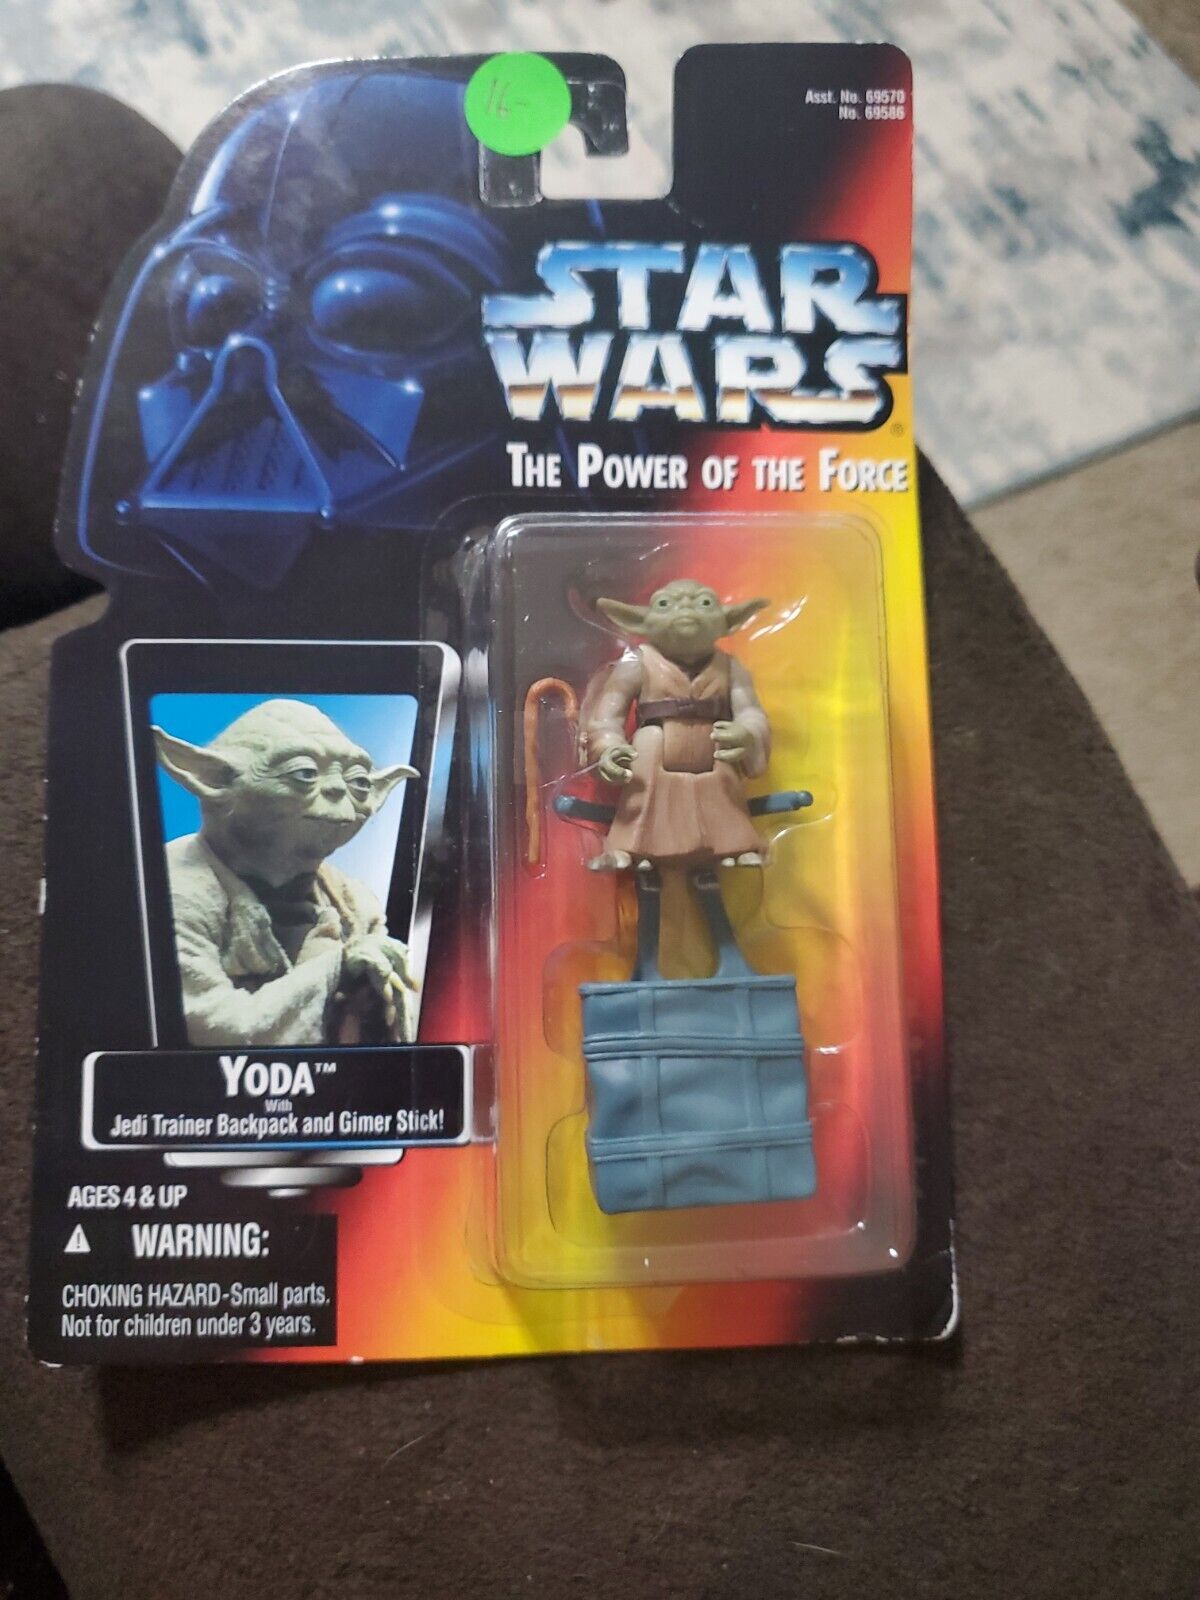 1995 Kenner Star Wars Yoda with Jedi Trainer Backpack and Gimer Stick Unopened